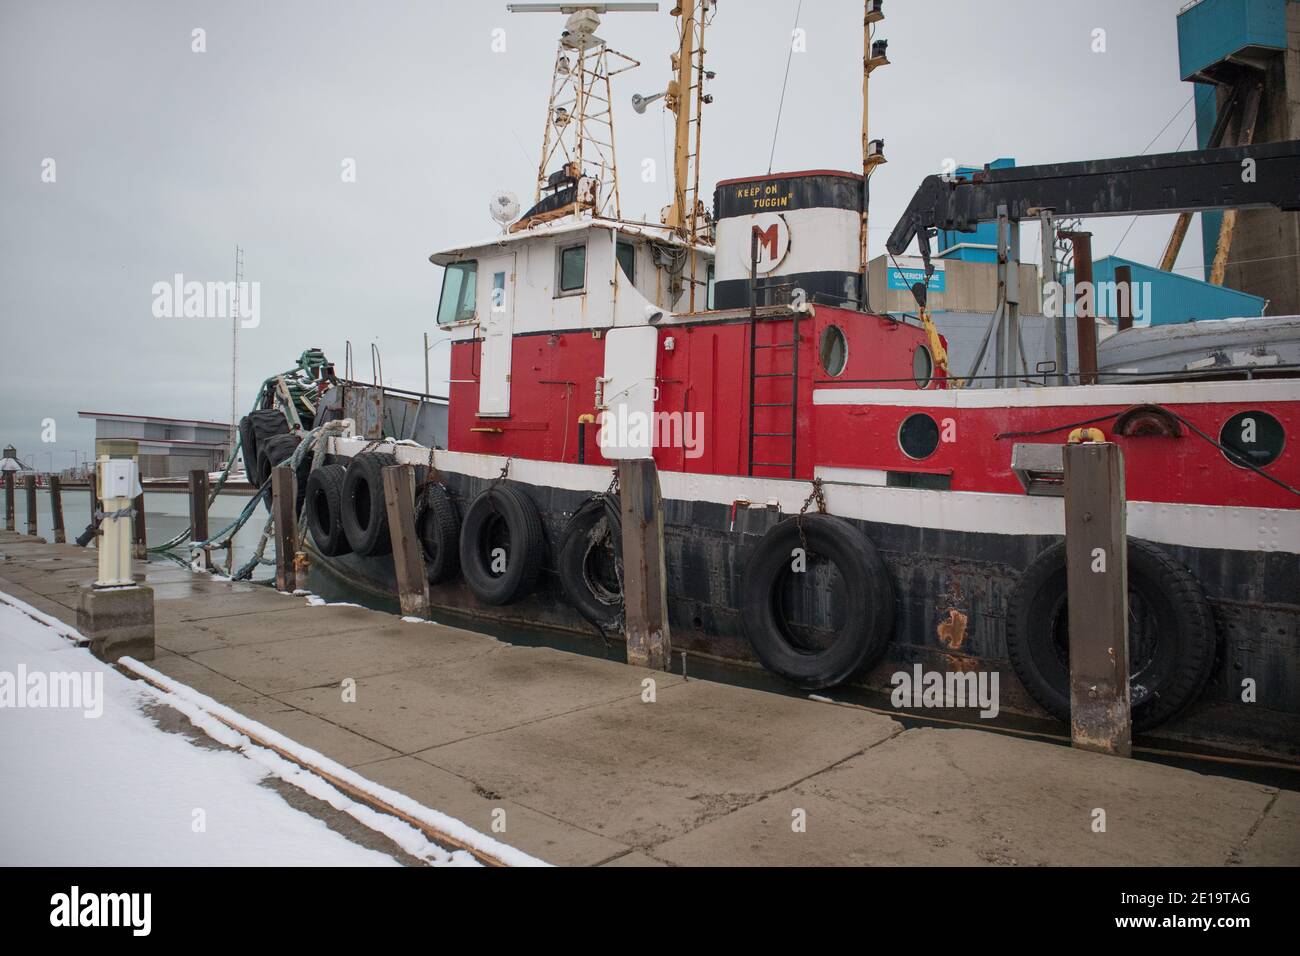 Tugboats moored to the dock. Stock Photo